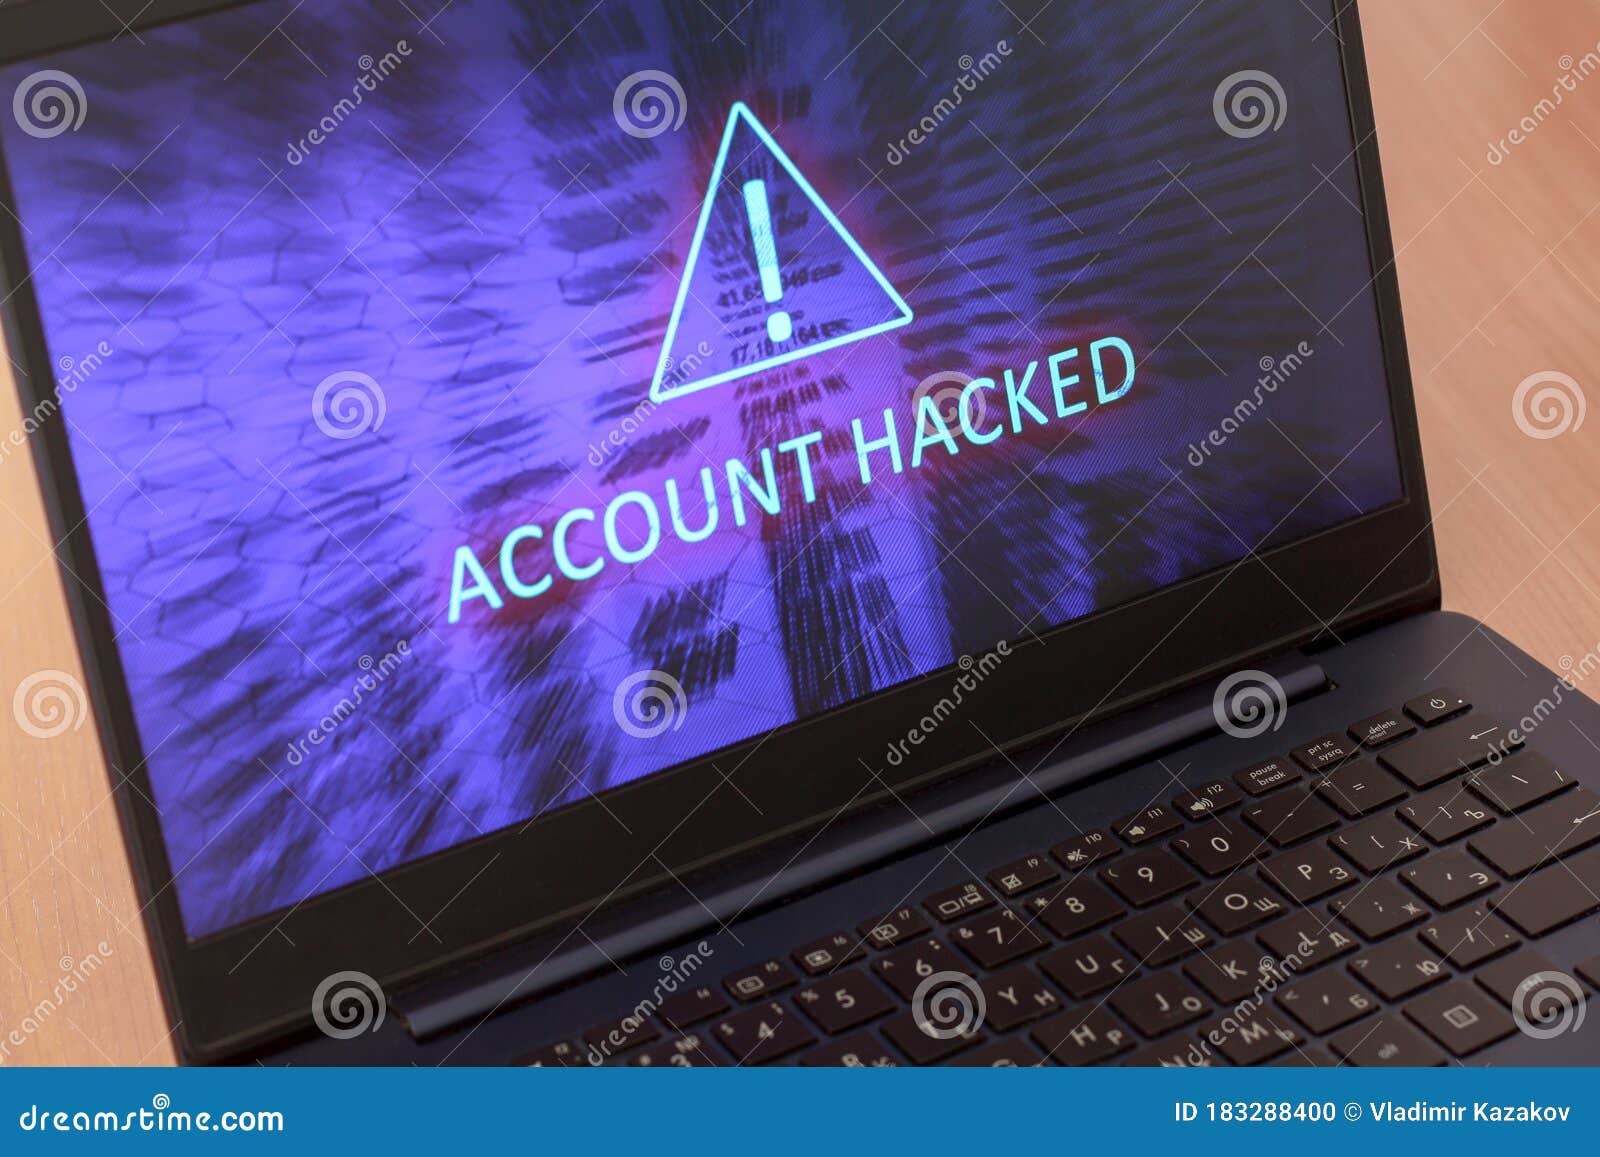 text account hacked on laptop screen.